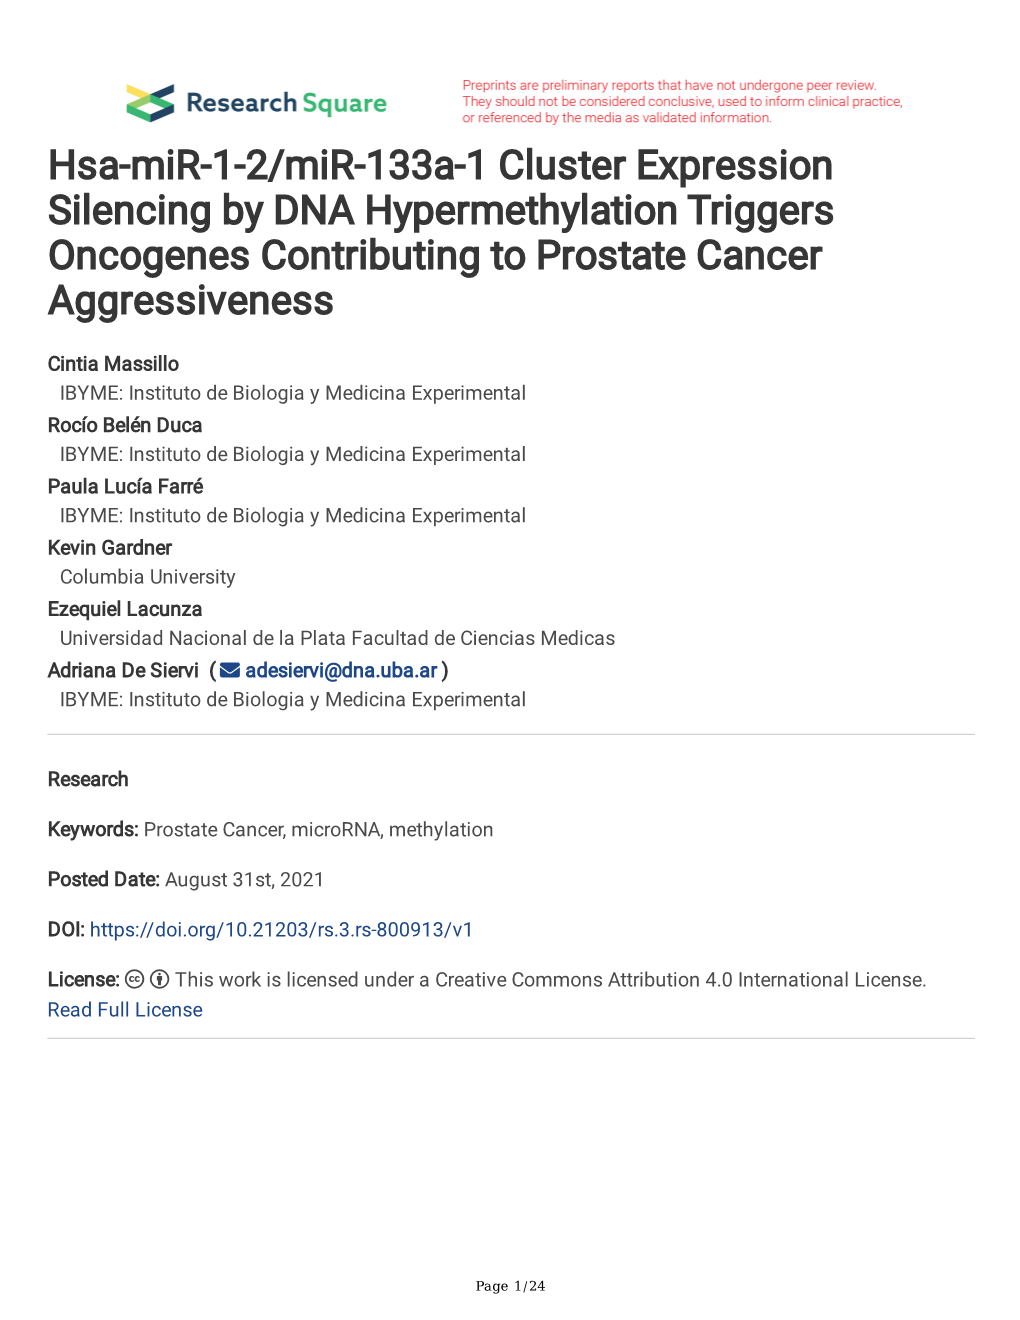 Hsa-Mir-1-2/Mir-133A-1 Cluster Expression Silencing by DNA Hypermethylation Triggers Oncogenes Contributing to Prostate Cancer Aggressiveness